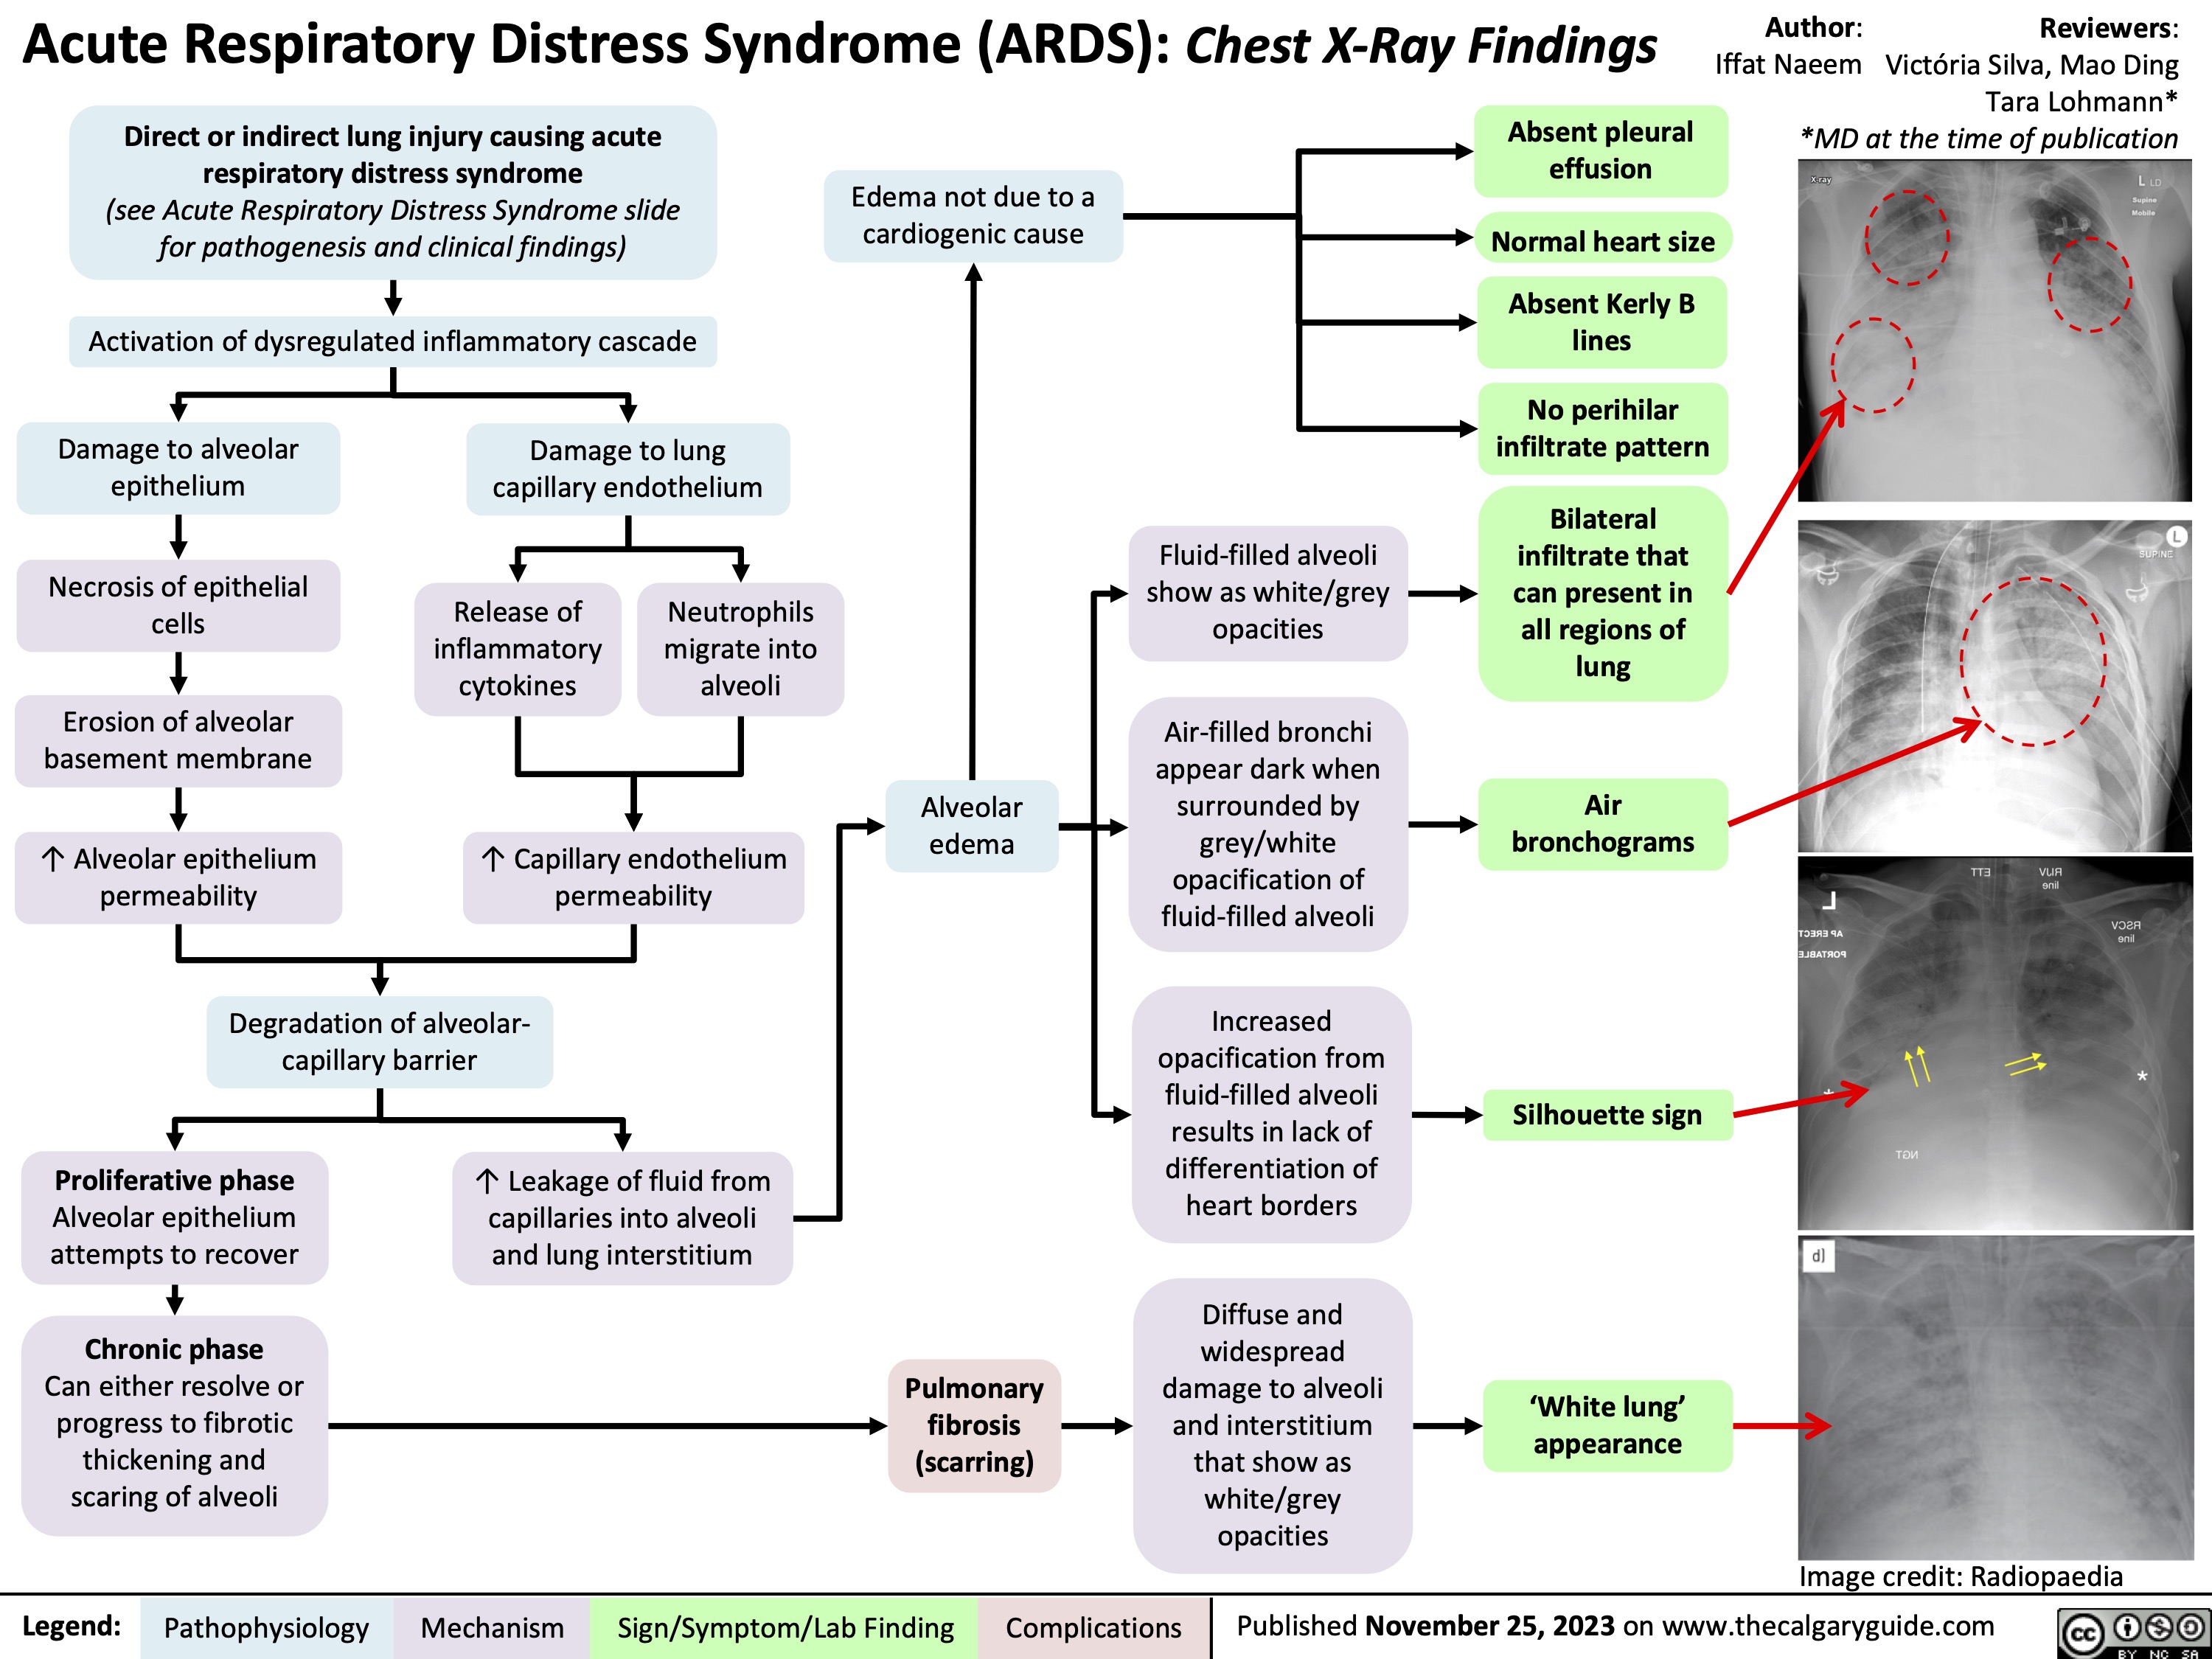 Acute Respiratory Distress Syndrome (ARDS): Chest X-Ray Findings
Author: Iffat Naeem
  Direct or indirect lung injury causing acute respiratory distress syndrome
(see Acute Respiratory Distress Syndrome slide for pathogenesis and clinical findings)
Activation of dysregulated inflammatory cascade
Absent pleural effusion
Normal heart size
Absent Kerly B lines
No perihilar infiltrate pattern
Bilateral infiltrate that can present in all regions of lung
Air bronchograms
Silhouette sign
Reviewers: Victória Silva, Mao Ding Tara Lohmann* *MD at the time of publication
   Edema not due to a cardiogenic cause
            Damage to alveolar epithelium
Necrosis of epithelial cells
Erosion of alveolar basement membrane
↑ Alveolar epithelium permeability
Damage to lung capillary endothelium
          Release of inflammatory cytokines
Neutrophils migrate into alveoli
Fluid-filled alveoli show as white/grey opacities
Air-filled bronchi appear dark when surrounded by grey/white opacification of fluid-filled alveoli
Increased opacification from fluid-filled alveoli results in lack of differentiation of heart borders
Diffuse and
widespread damage to alveoli and interstitium that show as white/grey opacities
        ↑ Capillary endothelium permeability
Alveolar edema
     Degradation of alveolar- capillary barrier
     Proliferative phase
Alveolar epithelium attempts to recover
Chronic phase
Can either resolve or progress to fibrotic thickening and scaring of alveoli
↑ Leakage of fluid from capillaries into alveoli and lung interstitium
    Pulmonary fibrosis (scarring)
‘White lung’ appearance
  Image credit: Radiopaedia
 Legend:
 Pathophysiology
 Mechanism
Sign/Symptom/Lab Finding
 Complications
Published November 25, 2023 on www.thecalgaryguide.com
   
Acute Respiratory Distress Syndrome (ARDS): Chest X-Ray Findings Direct or indirect lung injury causing acute
Author: Iffat Naeem Reviewers: Victória Silva
 respiratory distress syndrome*
Activation of dysregulated inflammatory cascade
Bilateral infiltrate that show as white/grey   can present in
            Damage to alveolar epithelium
Necrosis of epithelial cells
Erosion of alveolar basement membrane
↑ Alveolar epithelium permeability
Damage to lung capillary endothelium
Fluid-filled alveoli opacities
Air-filled bronchi appear dark when surrounded by grey/white opacification of fluid-filled alveoli
Increased opacification from fluid-filled alveoli results in lack of differentiation of heart borders
Diffuse and
all regions of lung
      Release of inflammatory cytokines
Neutrophils migrate into alveoli
Alveolar edema
Air bronchograms
              ↑ Capillary endothelium permeability
    Degradation of alveolar-capillary barrier
       Proliferative phase
Alveolar epithelium attempts to recover
Chronic phase
Can either resolve or progress to fibrotic thickening and scaring of alveoli
↑ Leakage of fluid from capillaries into alveoli and lung interstitium
Silhouette Sign
     widespread Pulmonary   damage to alveoli
‘White lung’ appearance
    fibrosis (scarring)
and interstitium that show as white/grey opacities
 *See corresponding Calgary Guide slides for more details
Image credit: Radiopaedia
 Legend:
 Pathophysiology
 Mechanism
Sign/Symptom/Lab Finding
 Complications
Published X, 2023 on www.thecalgaryguide.com
   
Acute Respiratory Distress Syndrome (ARDS): Chest X-Ray Findings Direct or indirect lung injury causing acute respiratory
Author: Iffat Naeem Reviewers: Victória Silva
 distress syndrome*
Activation of dysregulated inflammatory cascade
Bilateral infiltrate that show as white/grey   can present in
              Damage to alveolar epithelium
Necrosis of epithelial cells
Denudation of alveolar basement membrane
↑ epithelium permeability
Degradation of alveolar-capillary barrier
Alveolar epithelium
attempts to recover through (proliferative phase)
Damage to lung capillary endothelium
Fluid-filled alveoli opacities
Air-filled bronchi appear dark when surrounded by grey/white opacification of fluid-filled alveoli
Increased opacification from fluid-filled alveoli results in lack of differentiation of heart borders
Diffuse and
all regions of lung
Air bronchograms
            Release of proinflamm atory cytokines
Neutrophil migration into airspace
Alveolar Edema
              ↑ capillary endothelium permeability
↑ leakage of fluid from vasculature into airspace and lung interstitium
Can either resolve or progress to fibrotic
Silhouette Sign
           widespread Pulmonary   damage to alveoli
‘White lung’ appearance
      thickening and scaring of   Fibrosis alveoli (chronic phase)
and interstitium that show as white/grey opacities
 Image credit: Radiopaedia
*See corresponding Calgary Guide slides for more details
 Legend:
 Pathophysiology
 Mechanism
Sign/Symptom/Lab Finding
 Complications
Published X, 2023 on www.thecalgaryguide.com
   
 Acute Respiratory Distress Syndrome (ARDS): Chest X-Ray Findings
Absent pleural effusion
Normal heart size
Absent Kerly B lines
No perihilar infiltrate pattern
Author: Iffat Naeem Reviewers: Victória Silva
   Acute Lung Injury (see ‘ARDS: Pathogenesis and Clinical findings’ slide) causing impaired oxygenation
Lung injury not due to cardiogenic cause
         (see ‘ARDS: Pathogenesis and Clinical findings’ slide)
Alveolar endothelium damage promotes inflammatory marker release
Exudative phase (1-6 days): neutrophils adhere to damaged endothelium and release pro- inflammatory mediators
Accumulation of intra-alveolar fluid that is rich in neutrophils, macrophages, and red blood cells
Proliferative phase (7-14 days): proliferation of alveolar epithelial
Fibroblasts deposit collagen tissue in alveolar walls and spaces
Can either resolve or progress to fibrotic thickening and scaring
Alveolar Edema
Fluid-filled alveoli show as white/grey opacities
Air-filled bronchi appear dark when surrounded by grey/white opacification of fluid-filled alveoli
Increased opacification from fluid-filled alveoli
Bilateral infiltrate present in all regions
Air bronchograms
                            results in lack of         Silhouette Sign differentiation of
  heart borders
  Diffuse alveolar damage
‘White lung’ appearance
Image credit: Radiopaedia
    *See corresponding Calgary Guide slides for more details
 Legend:
(chronic phase) Pathophysiology
  Mechanism
Sign/Symptom/Lab Finding
 Complications
Published X, 2023 on www.thecalgaryguide.com
    
    Lung injury not due to a cardiogenic cause
Absent pleural effusion
Normal heart size
Absent Kerly B lines
No perihilar infiltrate pattern
       Acute Respiratory Distress Syndrome (ARDS): Chest X-Ray Findings
  